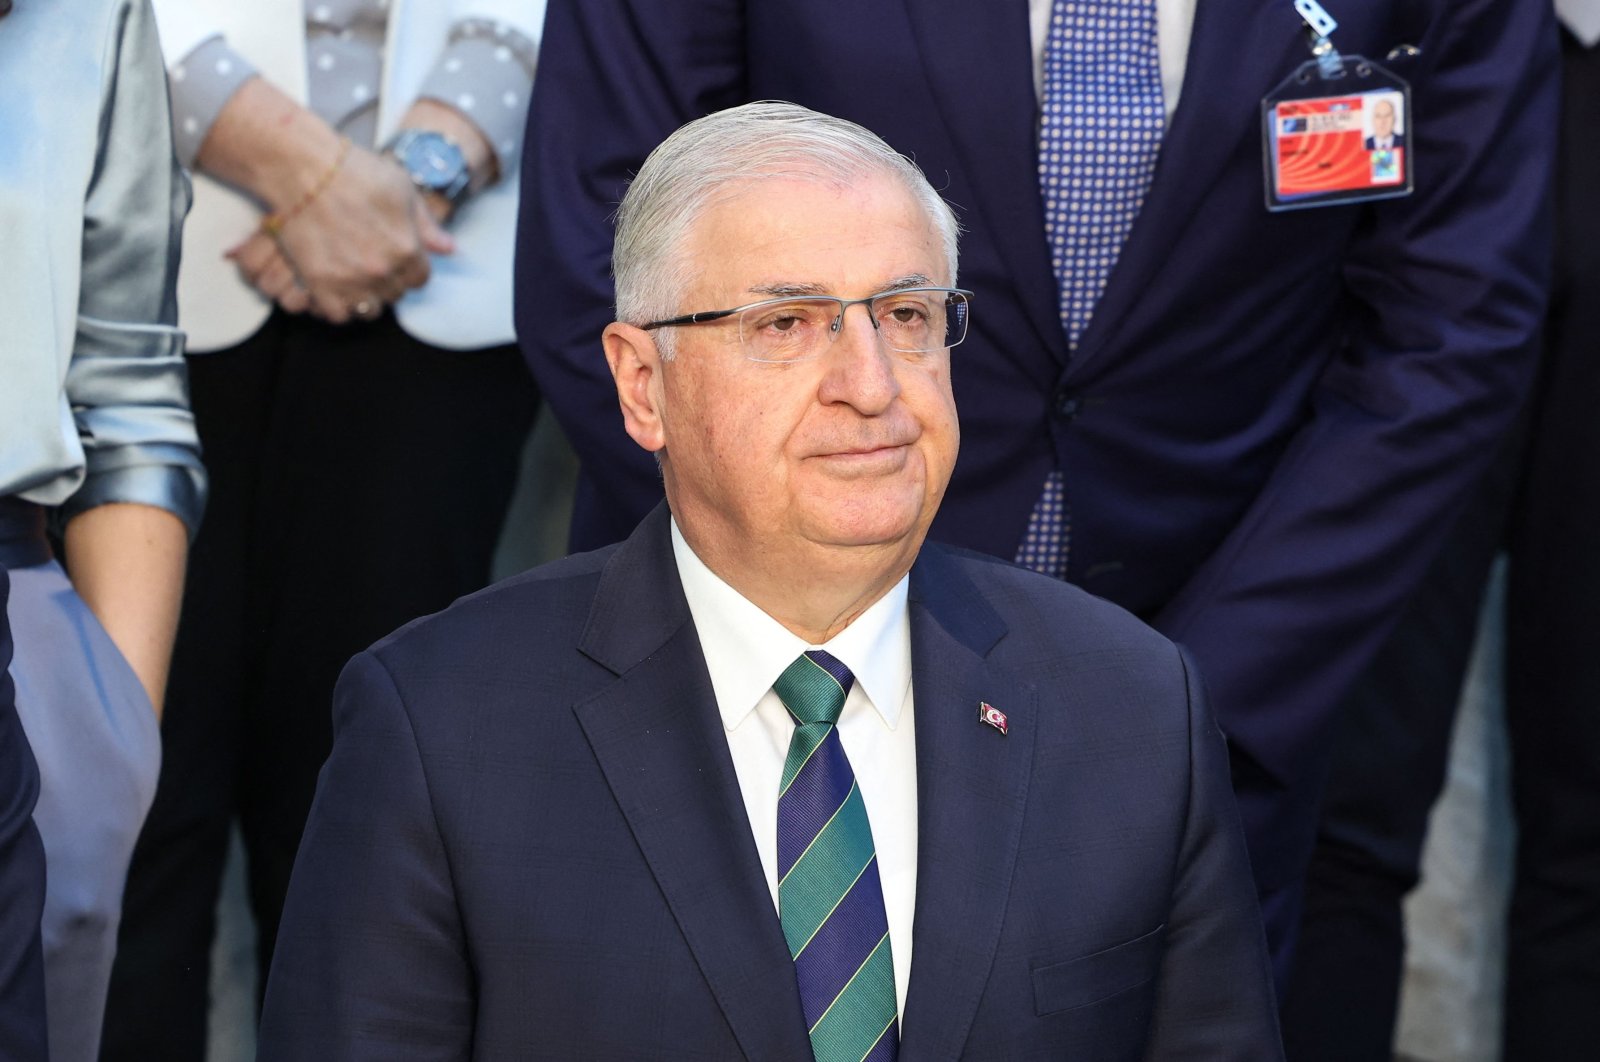 Defense Minister Yaşar Güler looks on as he poses for an official photograph at the NATO headquarters in Brussels, Belgium, June 16, 2023. (AFP File Photo)